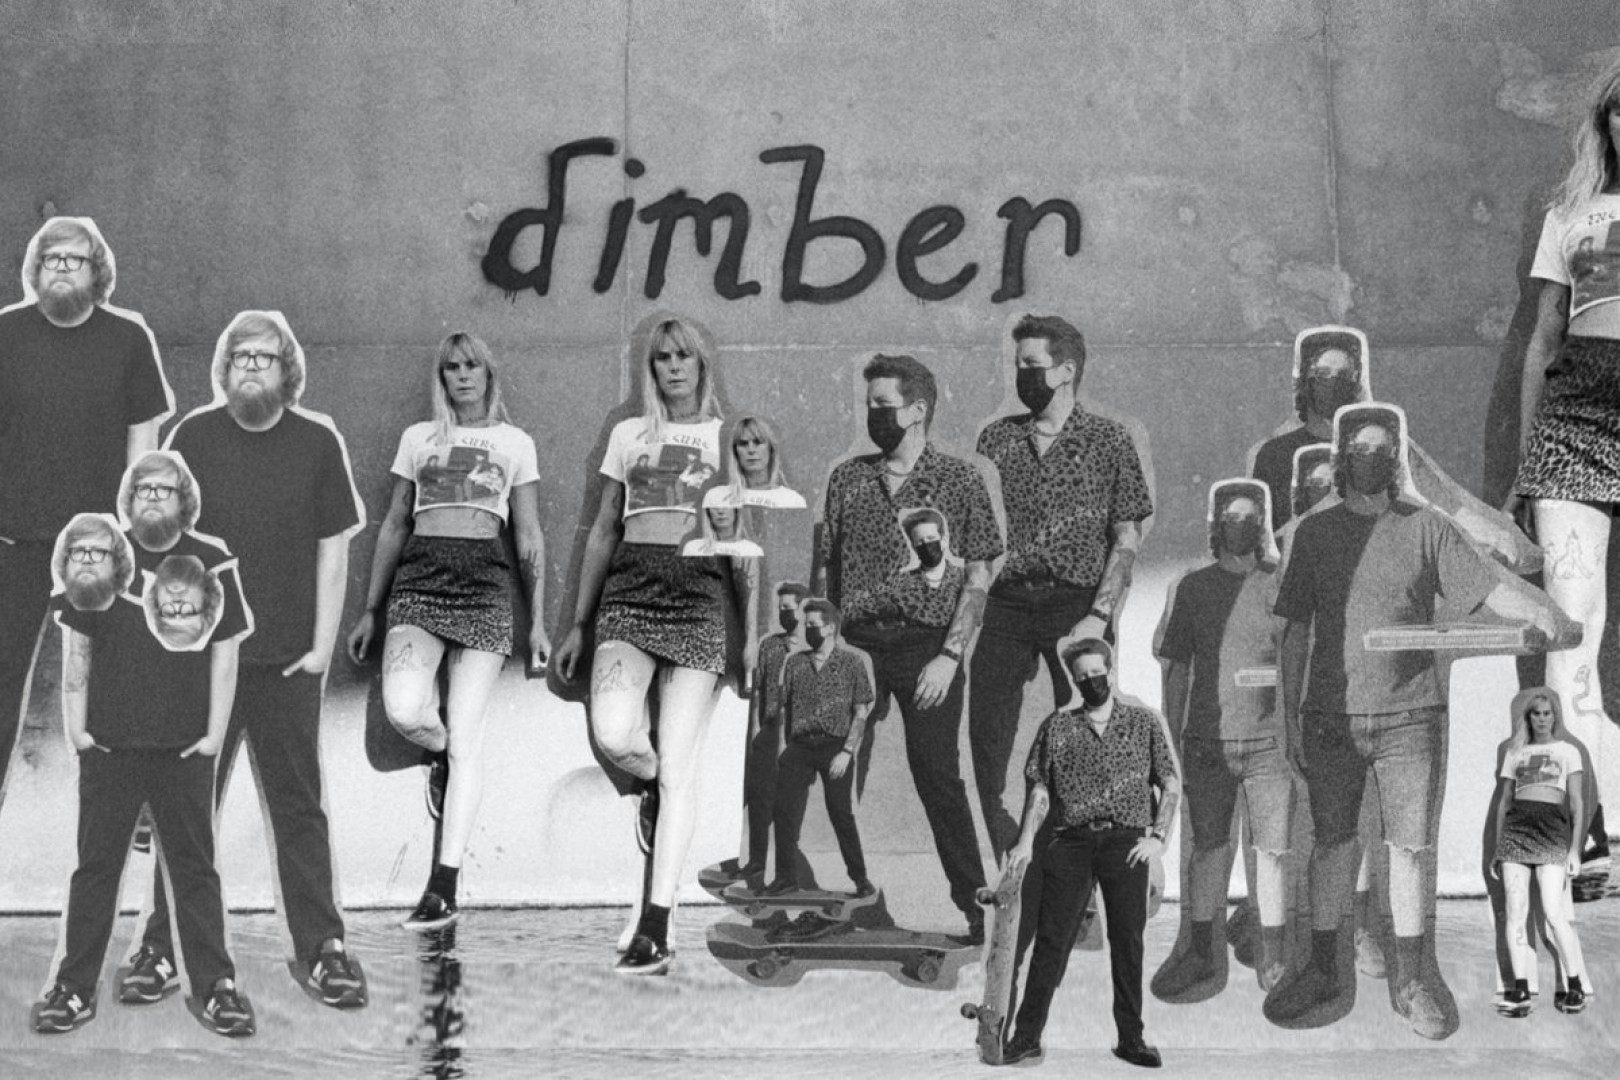 Check out the new track by Dimber!